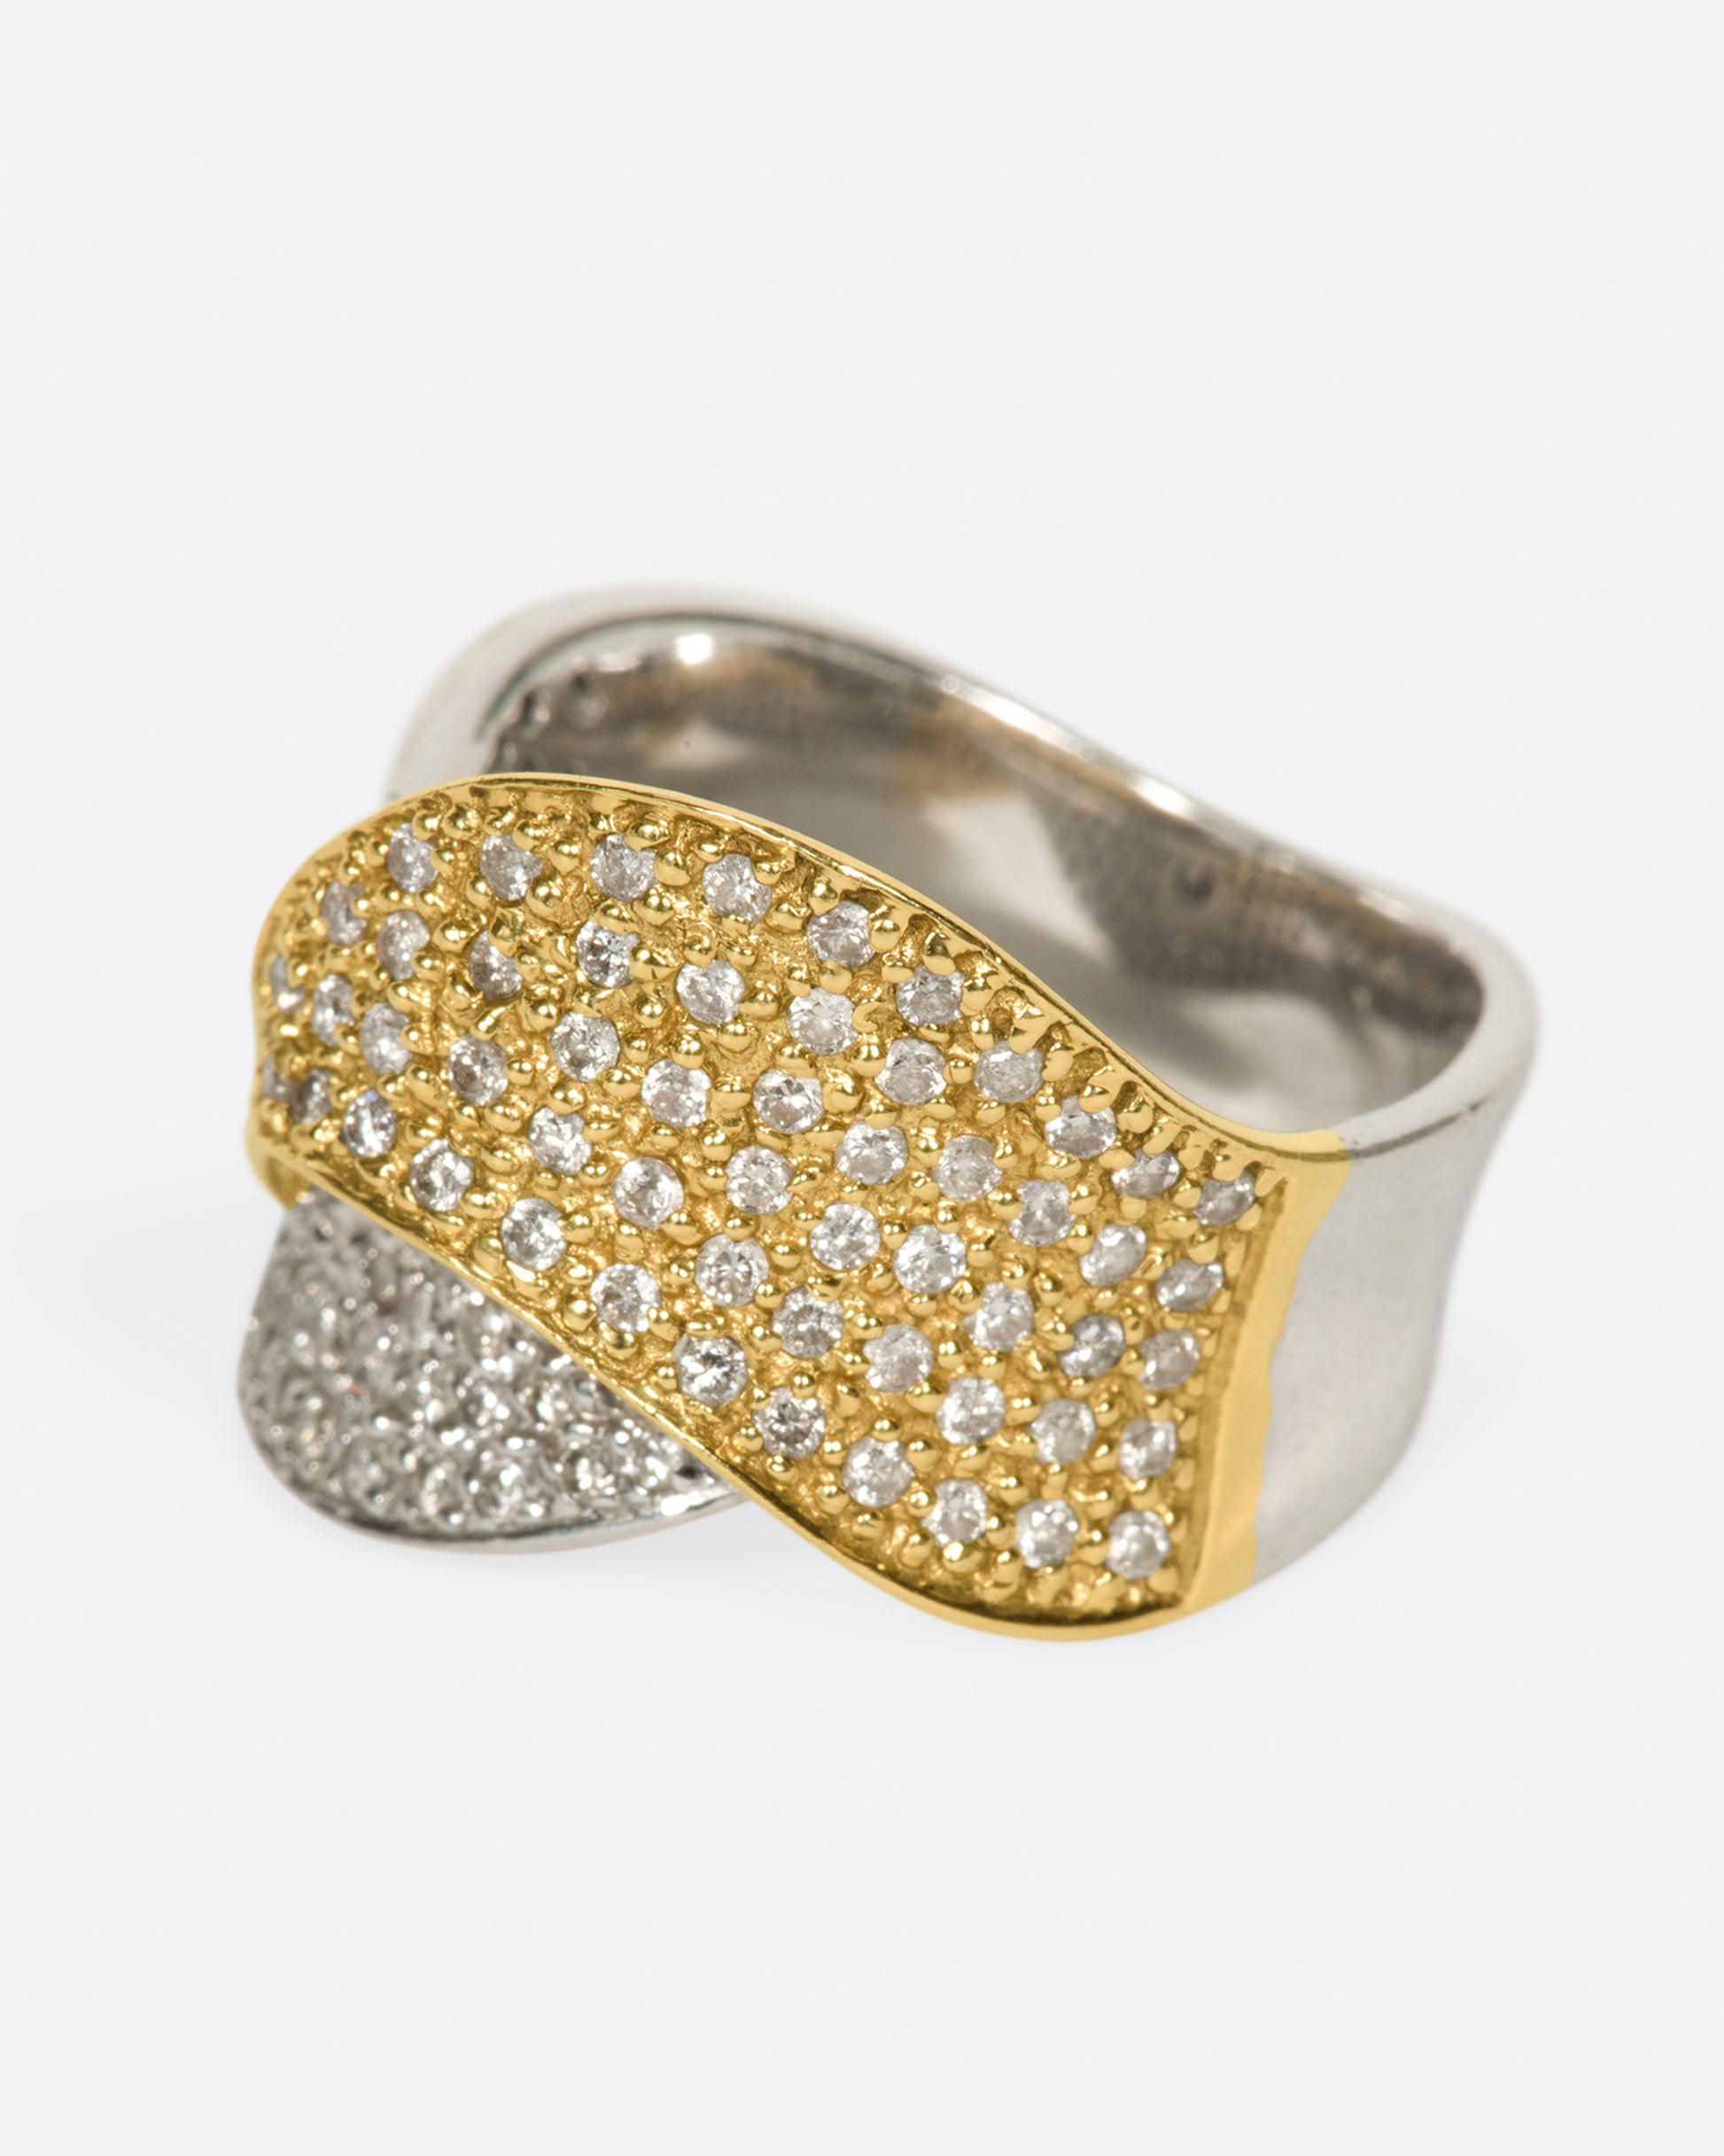 A half white gold, half yellow gold, diamond-covered ring to wrap around your finger.